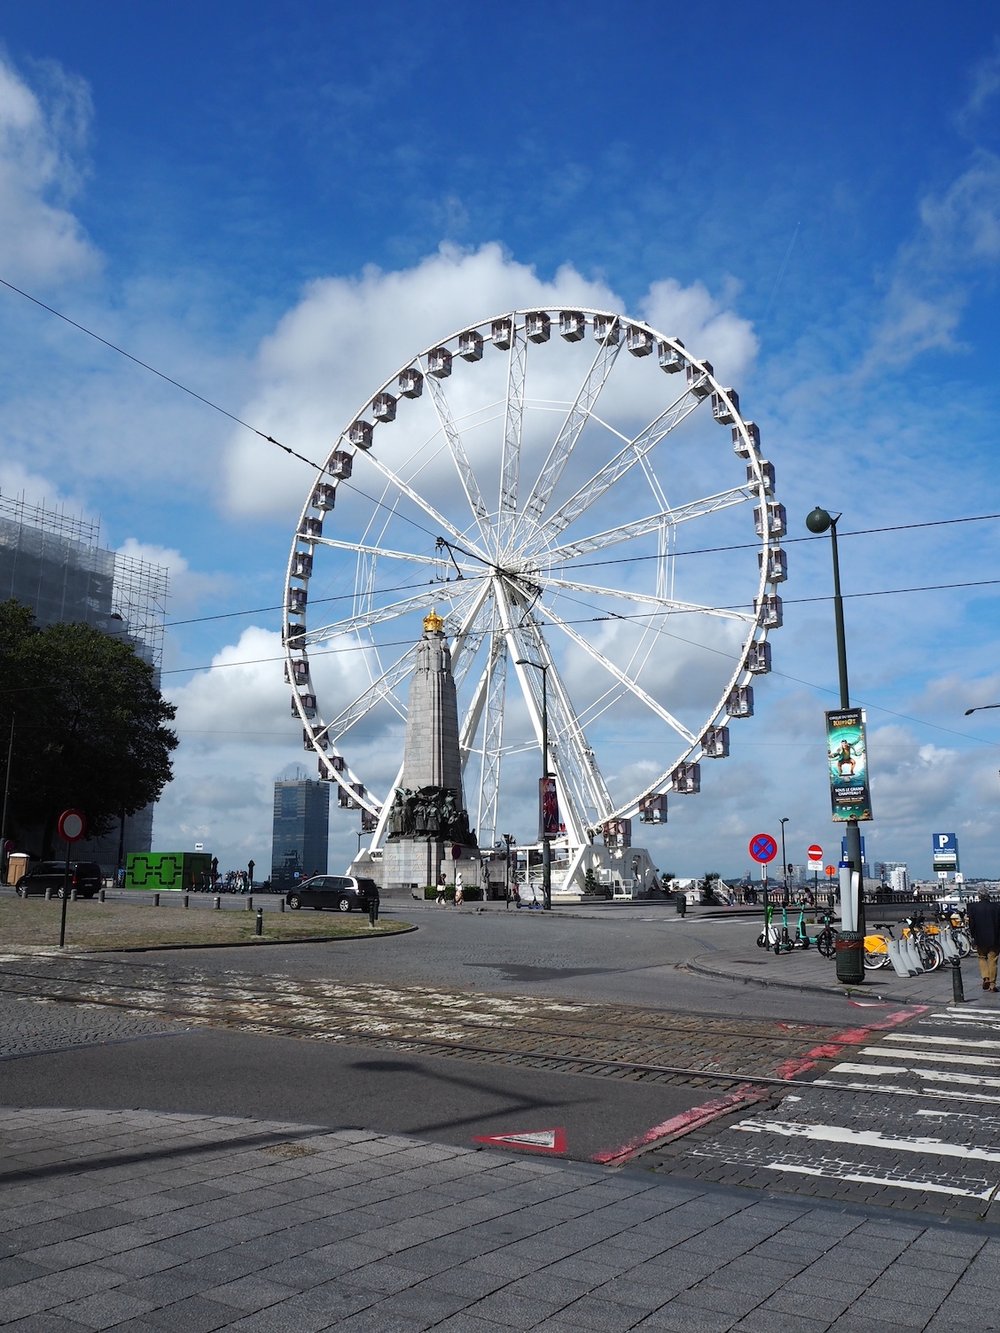 The Giant Wheel: The View